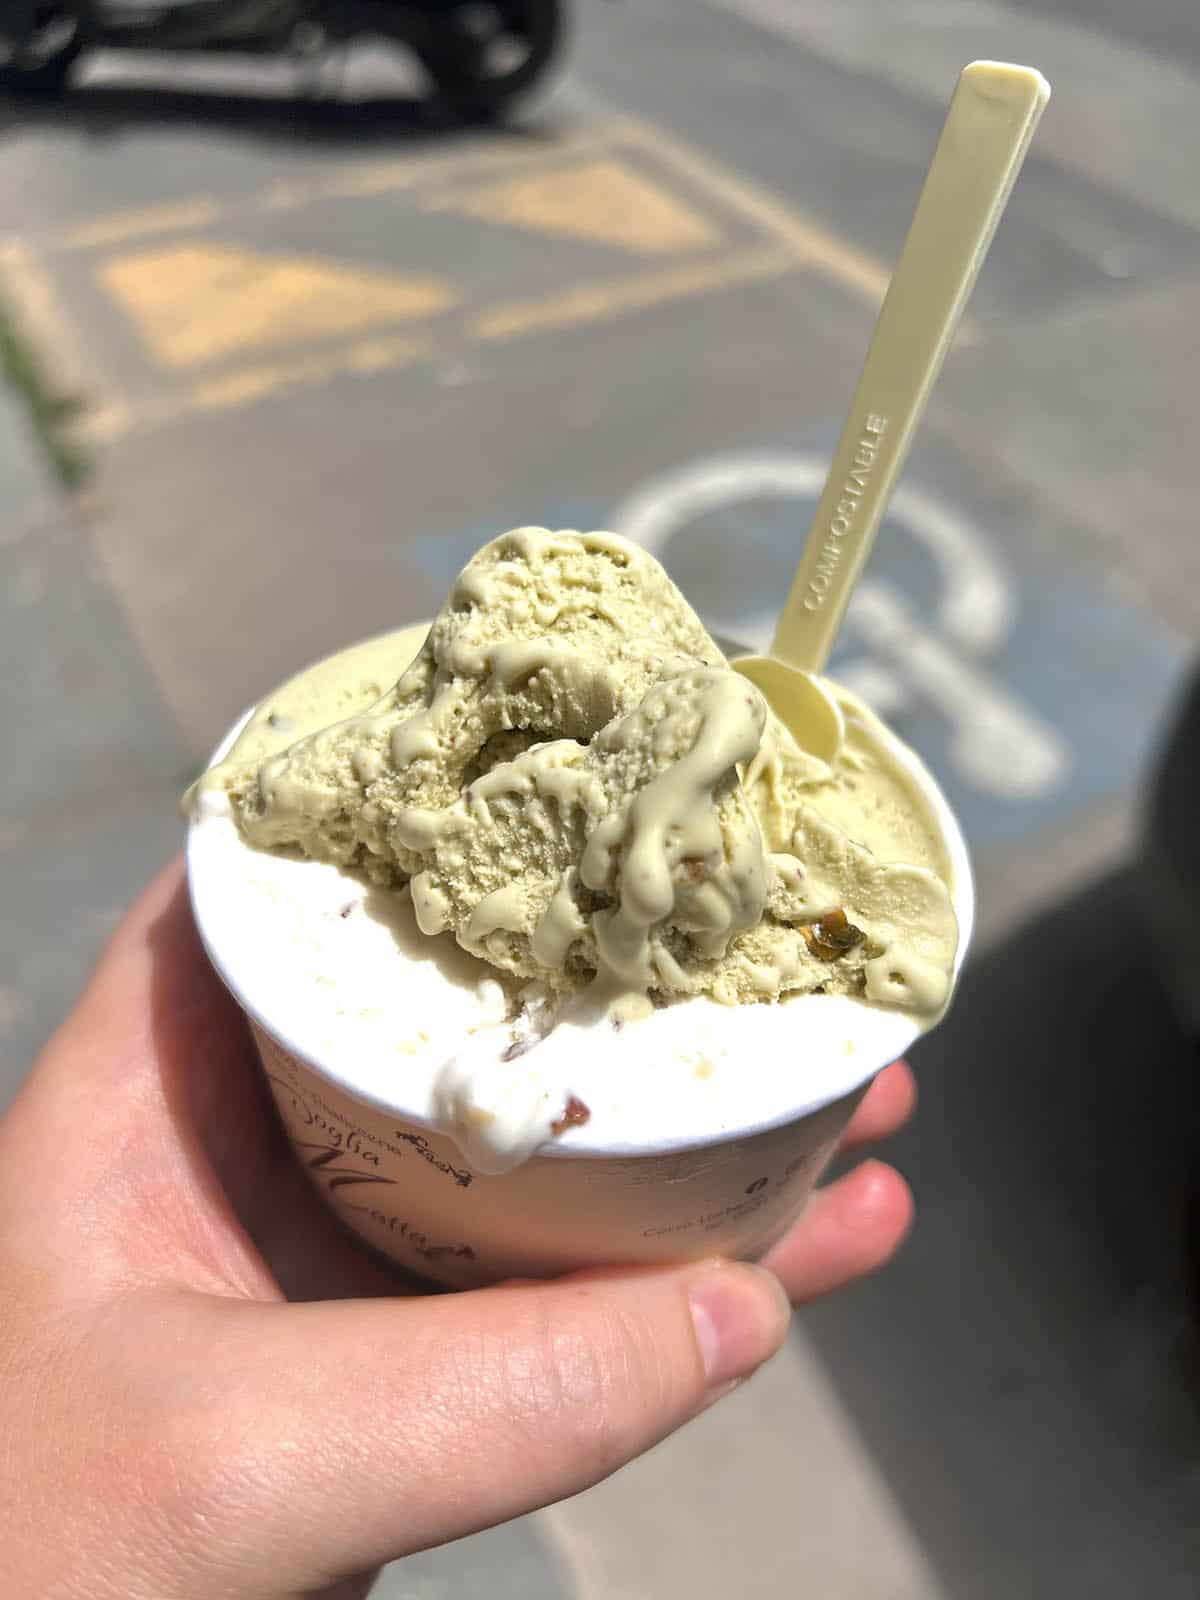 An image of a hand holding out a cup of gelato with stracciatella hazelnut and pistachio flavours by the roadside in Sicily.